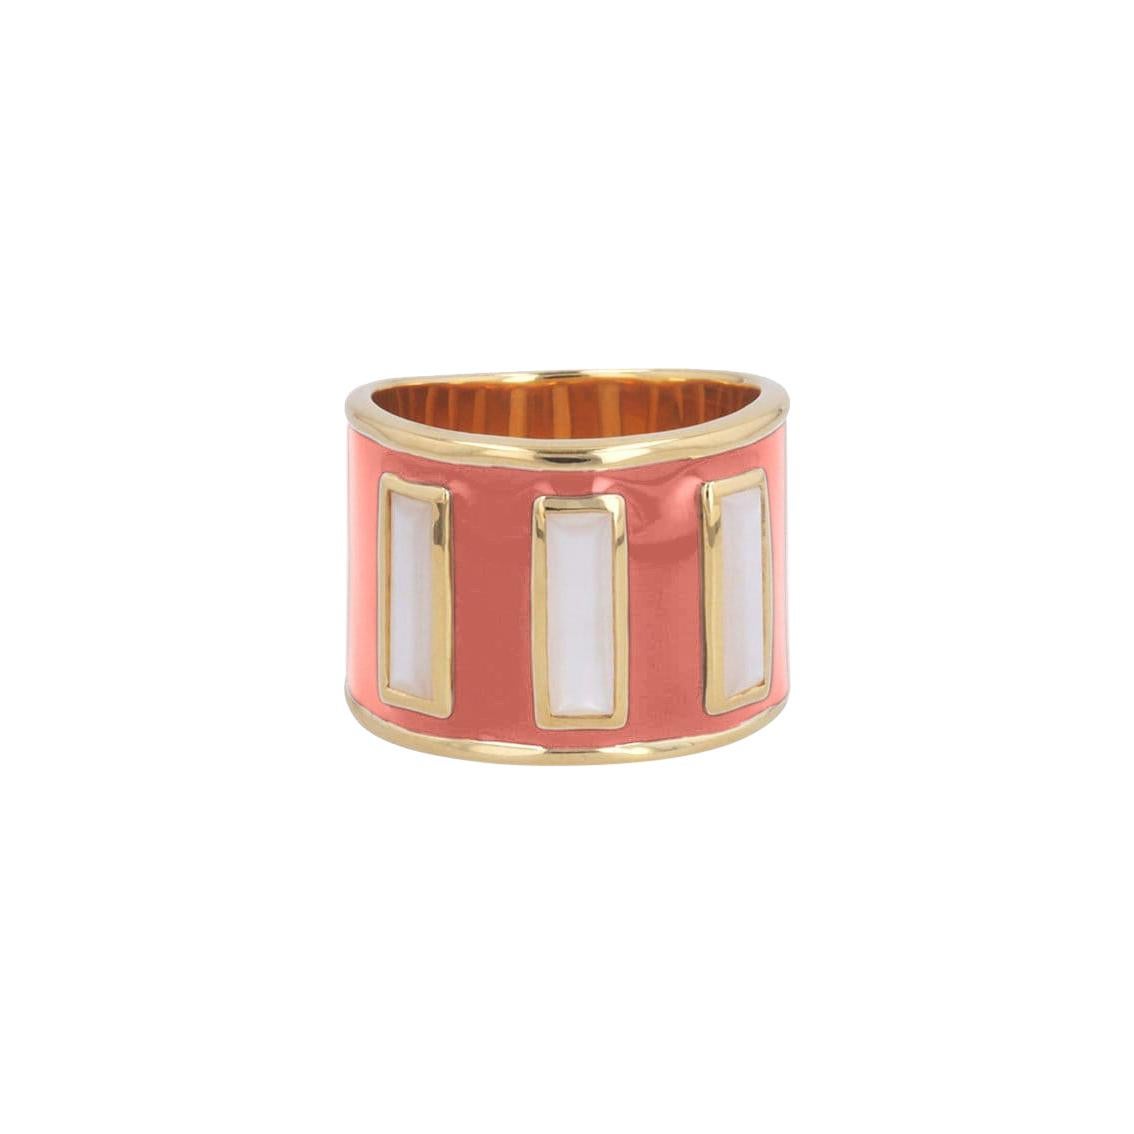 Limited Edition Gigi Enamel Ring in New Colors with Mother of Pearl